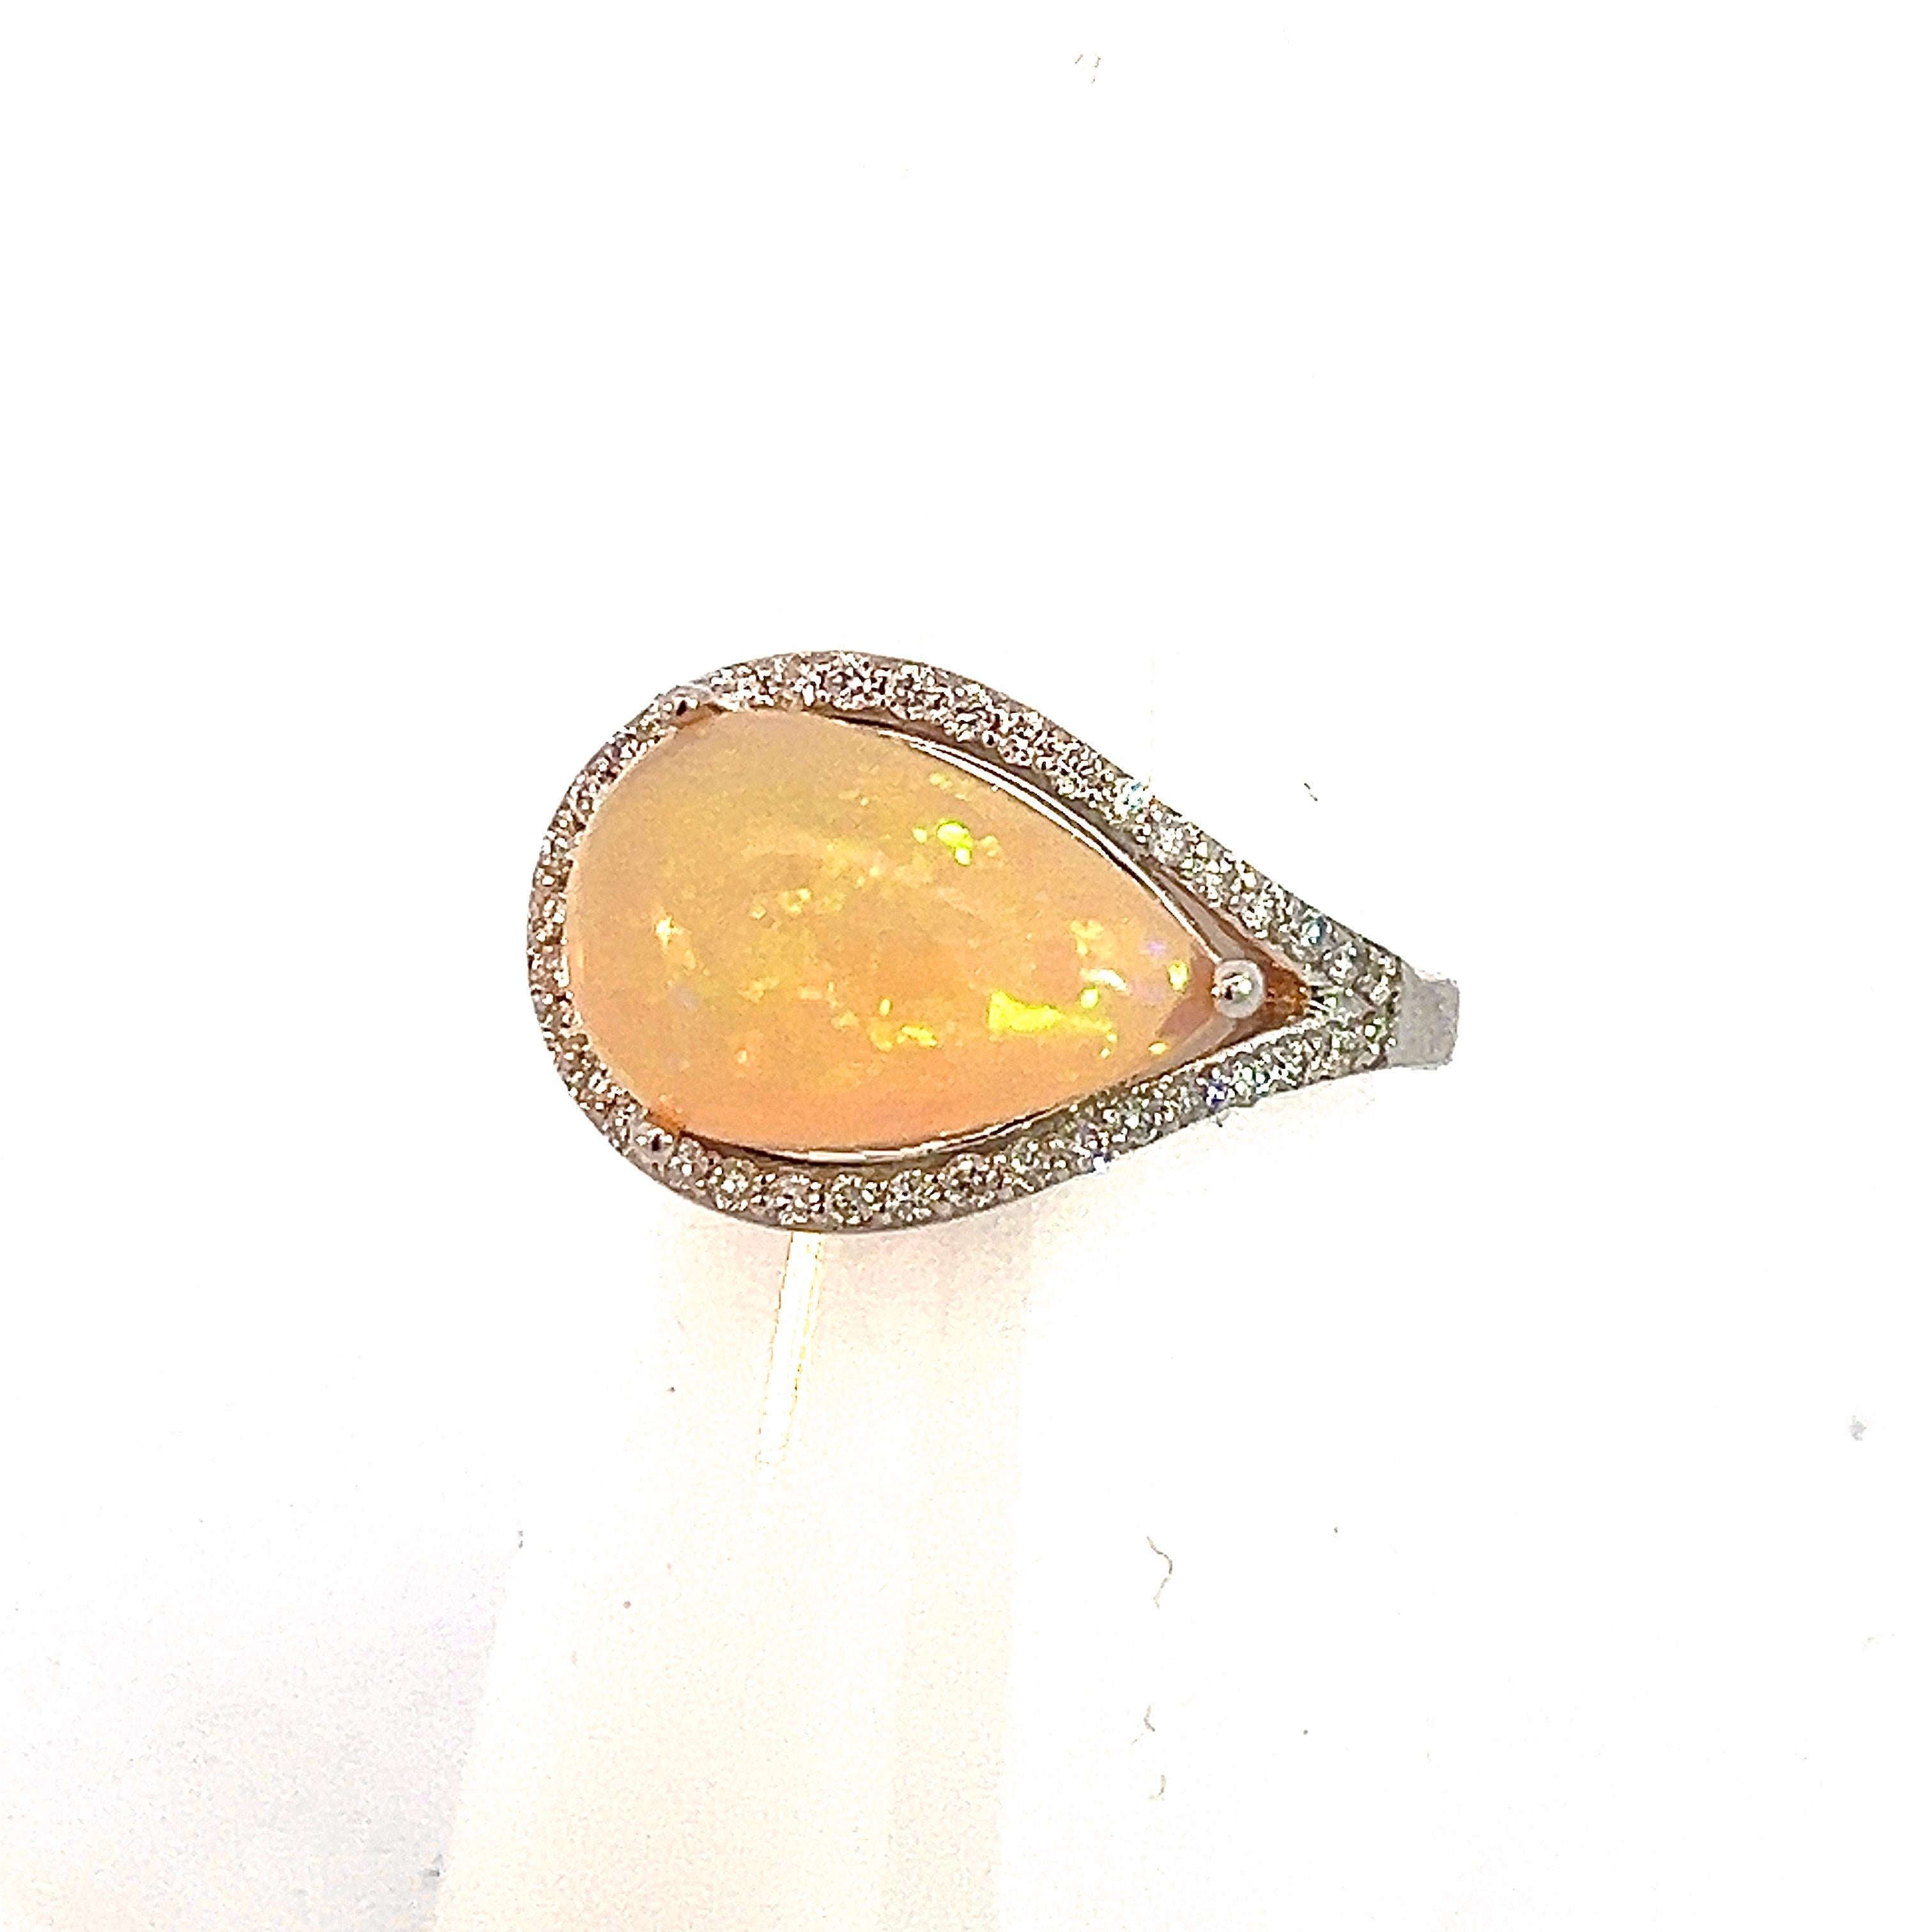 Natural Fine Quality Opal Diamond Ring 6.75 14k W Gold 4 TCW Certified $4,950 310548

This is a Unique Custom Made Glamorous Piece of Jewelry!

Nothing says, “I Love you” more than Diamonds and Pearls!

This Opal ring has been Certified, Inspected,